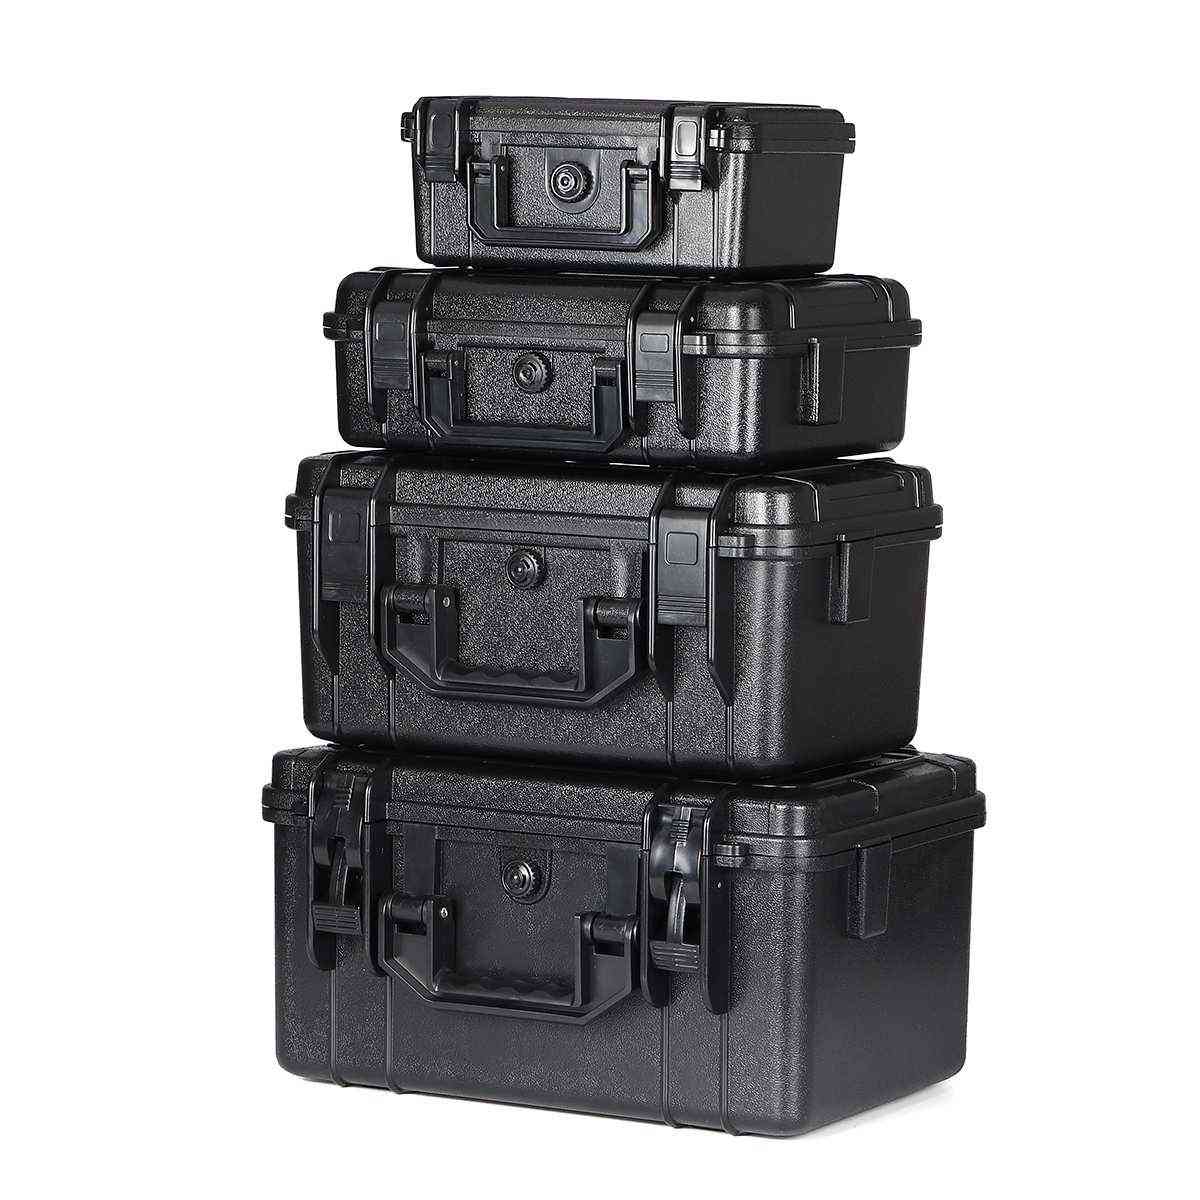 Waterproof Safety Abs Plastic Tool Box - Outdoor Tactical Equipment Storage Container